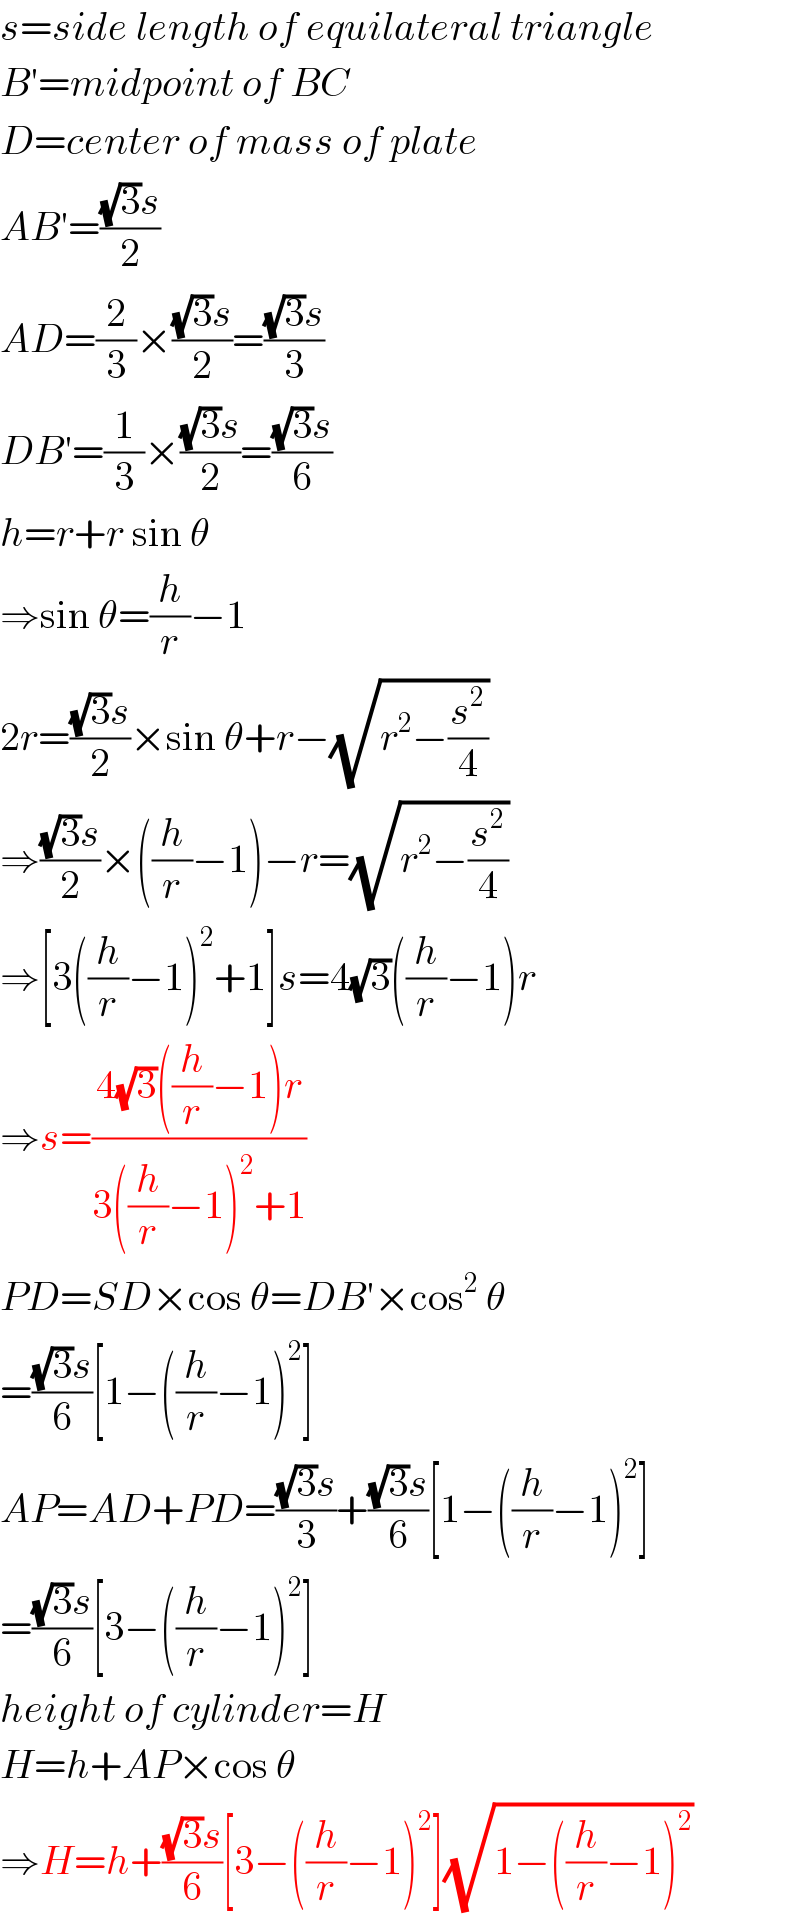 s=side length of equilateral triangle  B′=midpoint of BC  D=center of mass of plate  AB′=(((√3)s)/2)  AD=(2/3)×(((√3)s)/2)=(((√3)s)/3)  DB′=(1/3)×(((√3)s)/2)=(((√3)s)/6)  h=r+r sin θ  ⇒sin θ=(h/r)−1  2r=(((√3)s)/2)×sin θ+r−(√(r^2 −(s^2 /4)))  ⇒(((√3)s)/2)×((h/r)−1)−r=(√(r^2 −(s^2 /4)))  ⇒[3((h/r)−1)^2 +1]s=4(√3)((h/r)−1)r  ⇒s=((4(√3)((h/r)−1)r)/(3((h/r)−1)^2 +1))  PD=SD×cos θ=DB′×cos^2  θ  =(((√3)s)/6)[1−((h/r)−1)^2 ]  AP=AD+PD=(((√3)s)/3)+(((√3)s)/6)[1−((h/r)−1)^2 ]  =(((√3)s)/6)[3−((h/r)−1)^2 ]  height of cylinder=H  H=h+AP×cos θ  ⇒H=h+(((√3)s)/6)[3−((h/r)−1)^2 ](√(1−((h/r)−1)^2 ))  